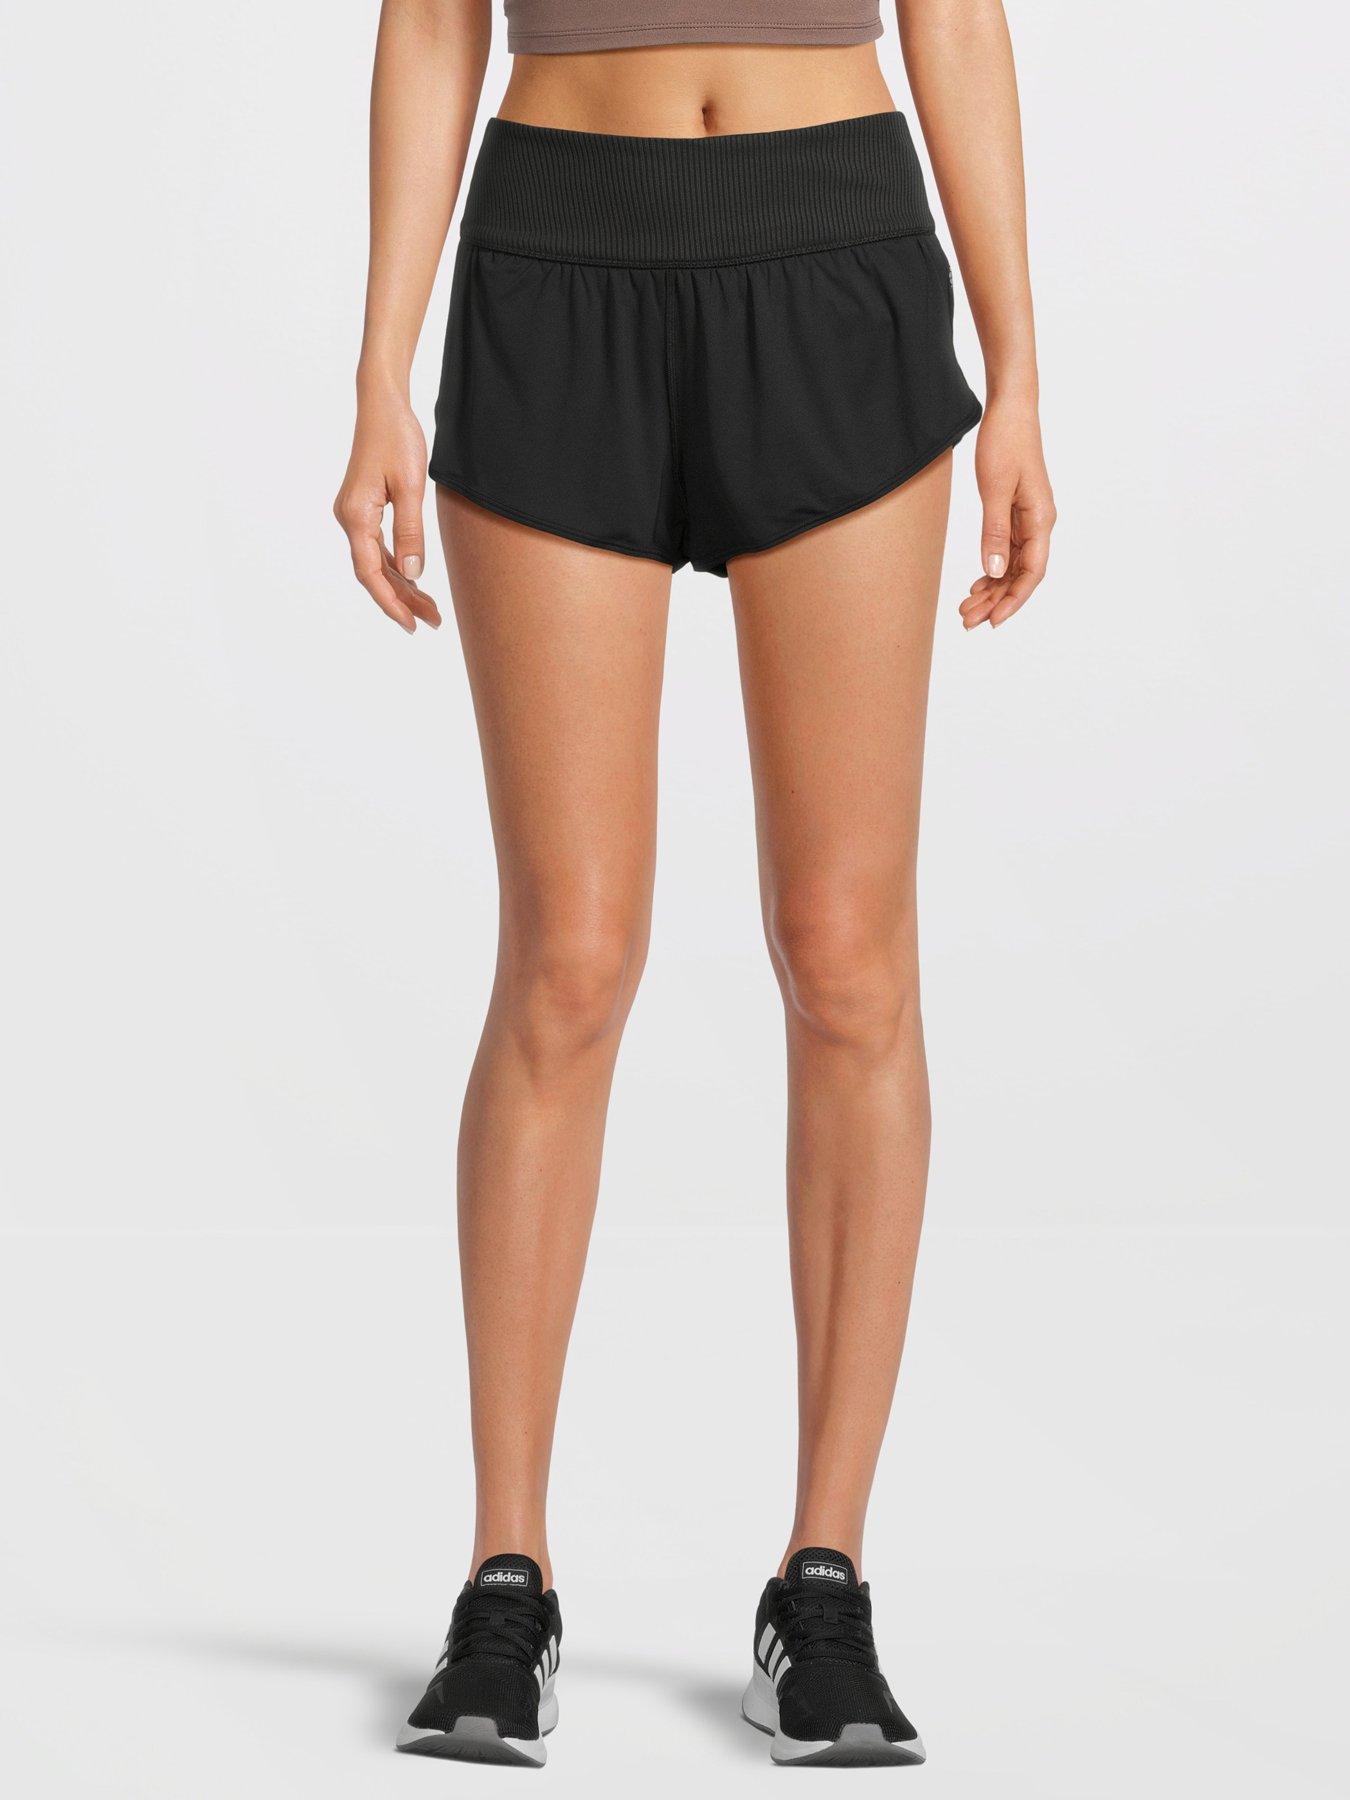 Free People Way Home Shorts – Evey K